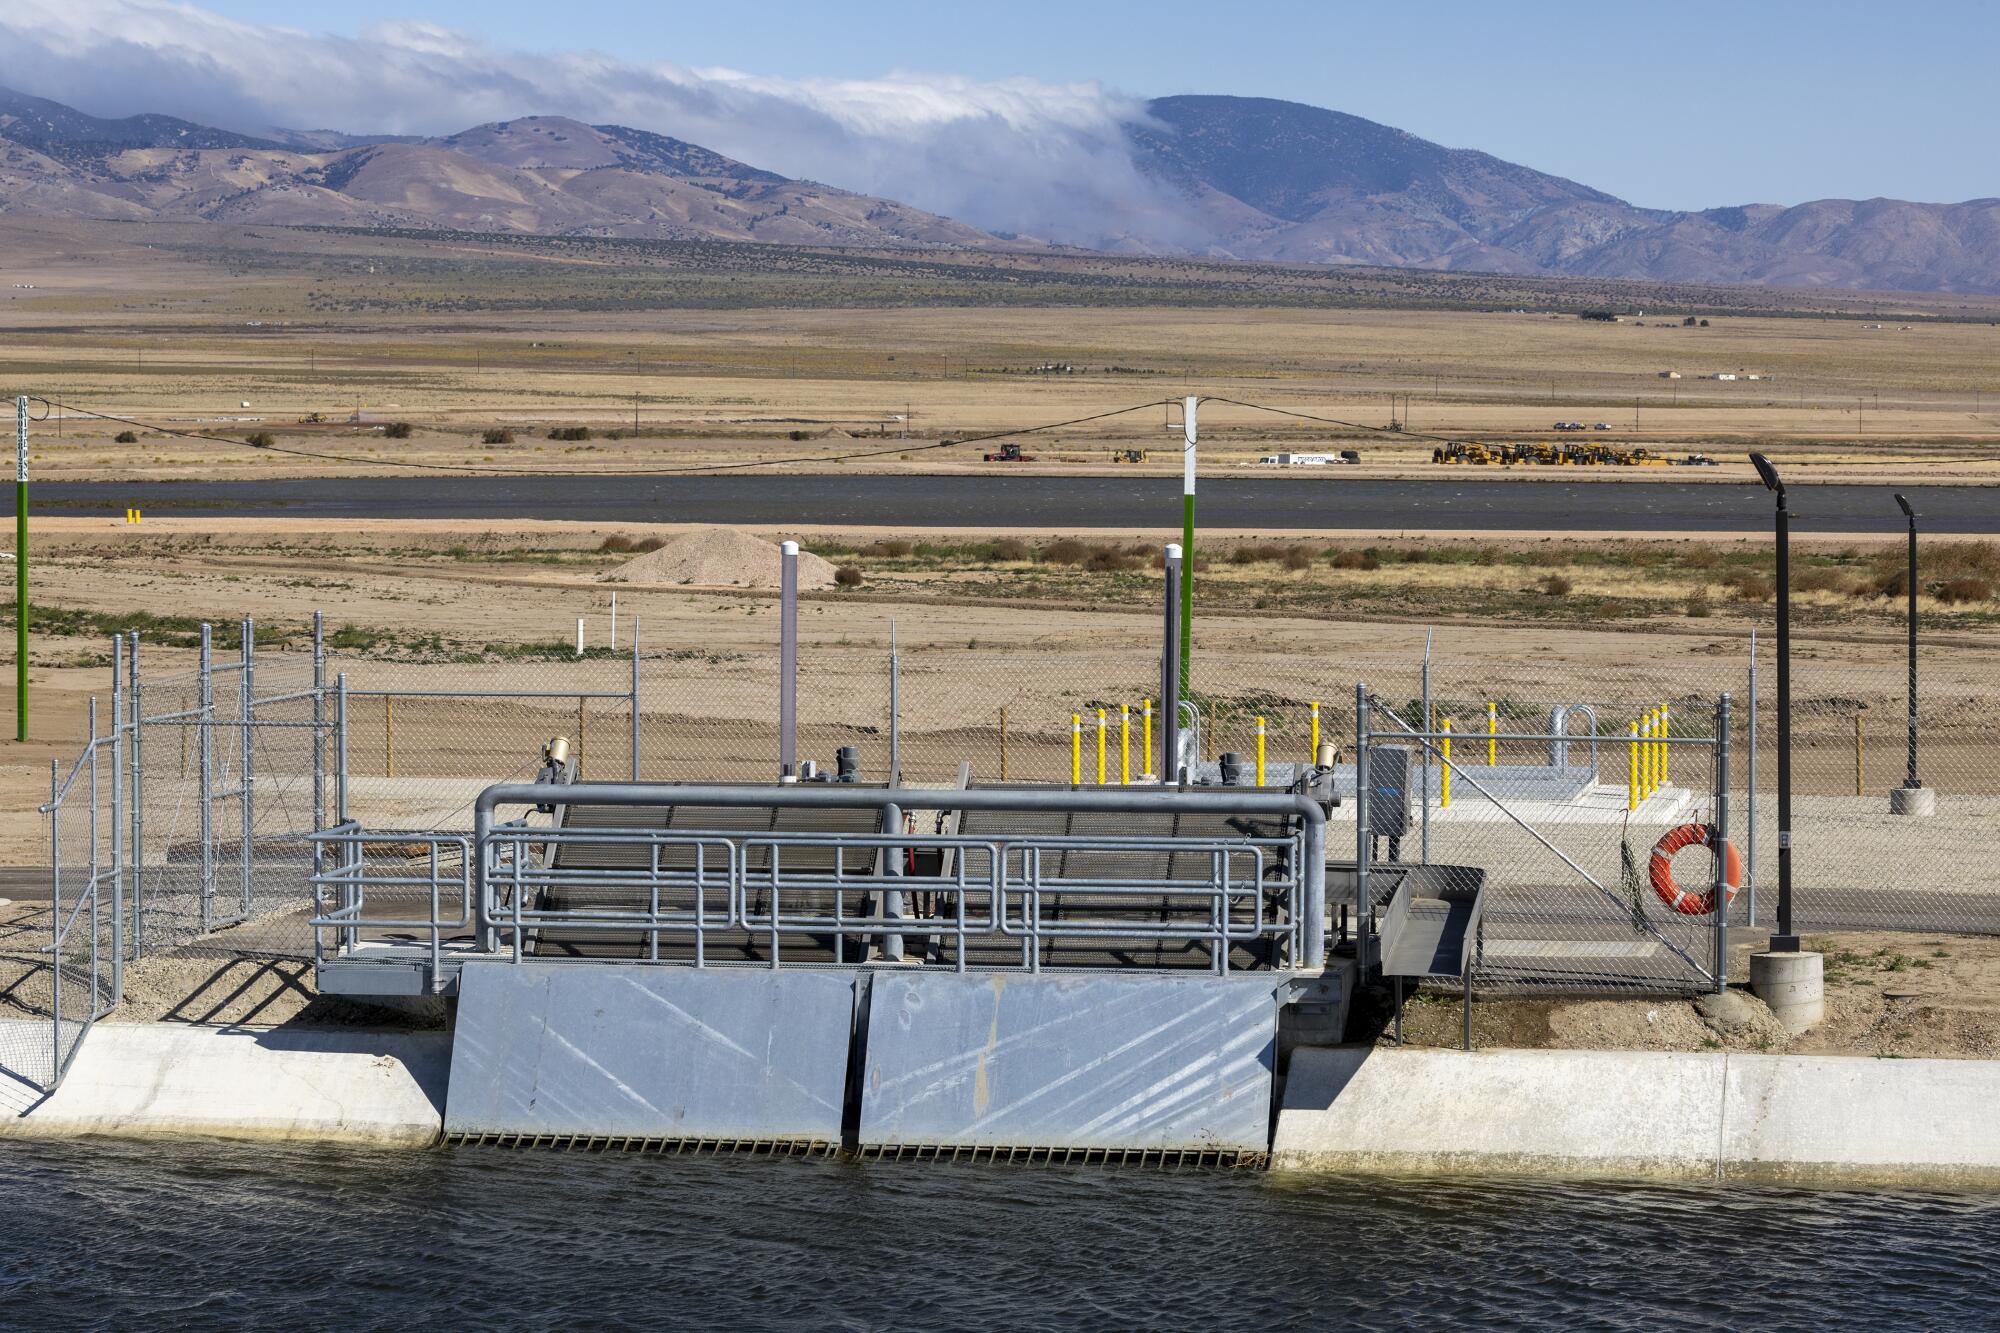 At a turnout facility on the California Aqueduct, water flows into the newly built High Desert Water Bank.